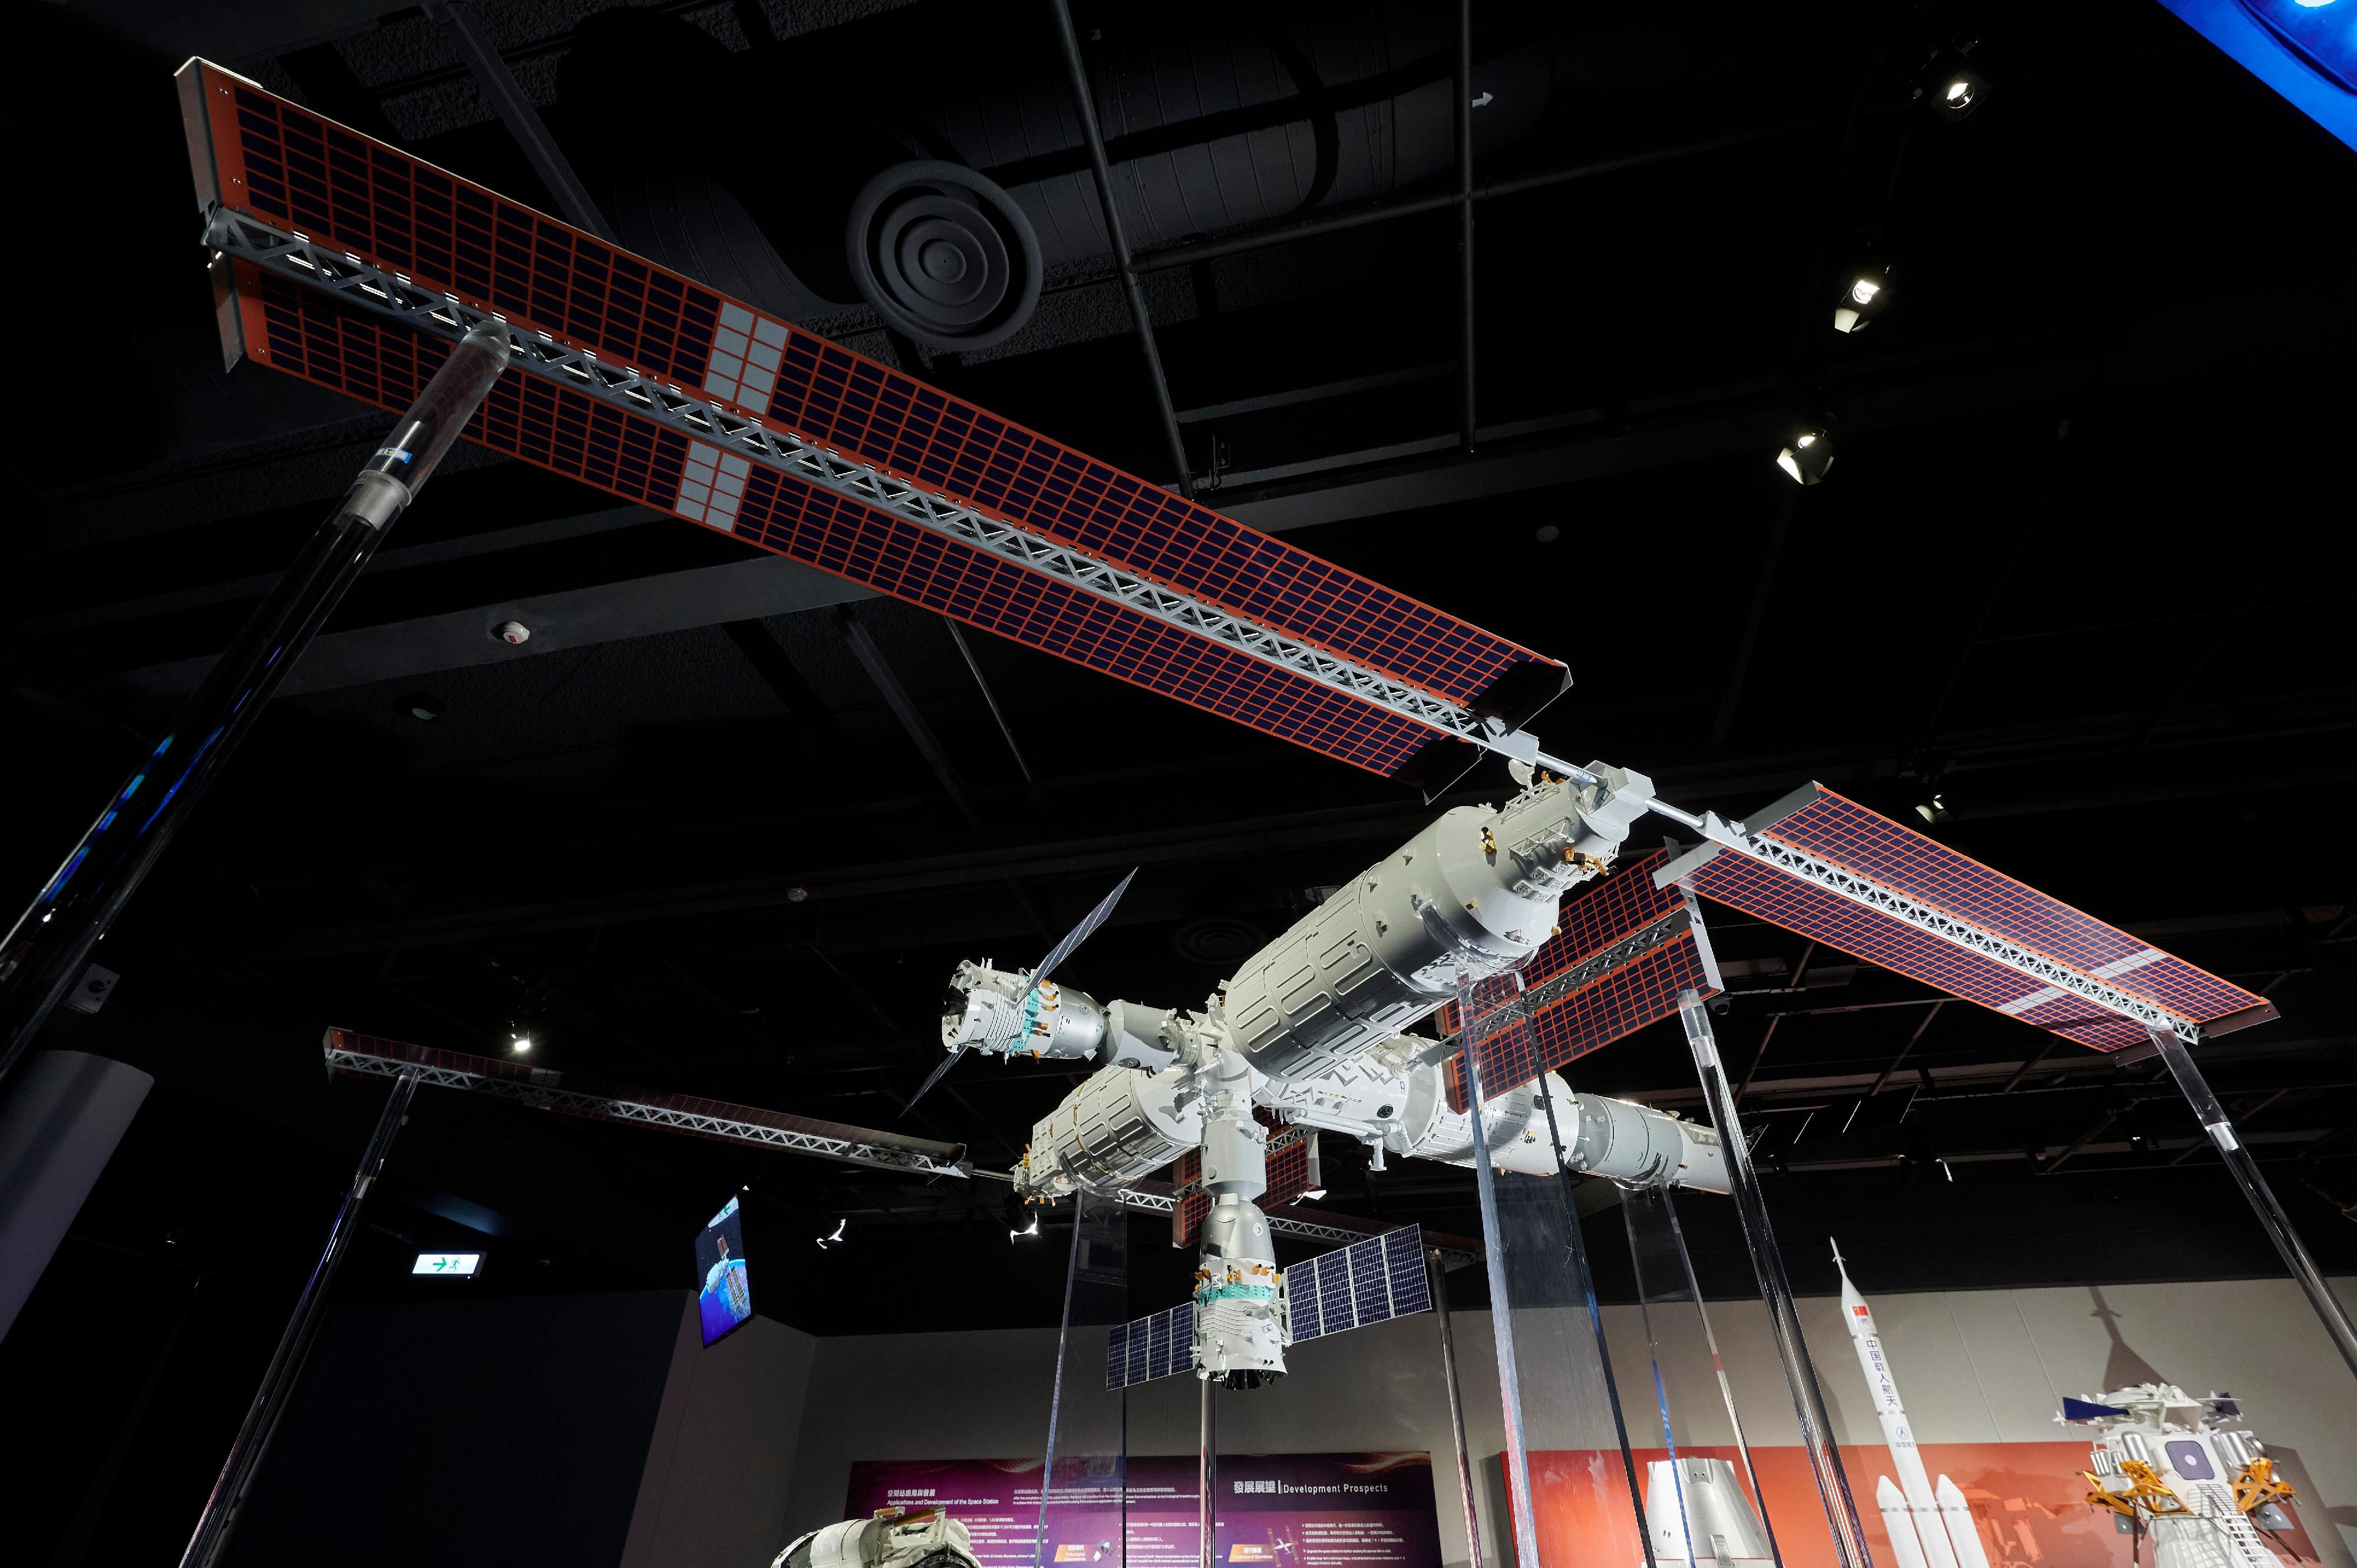 The China Manned Space Exhibition will be held from tomorrow (December 1) to February 18 next year at the Hong Kong Science Museum and the Hong Kong Museum of History. Photo shows the 1:15 model of the China's space station. 